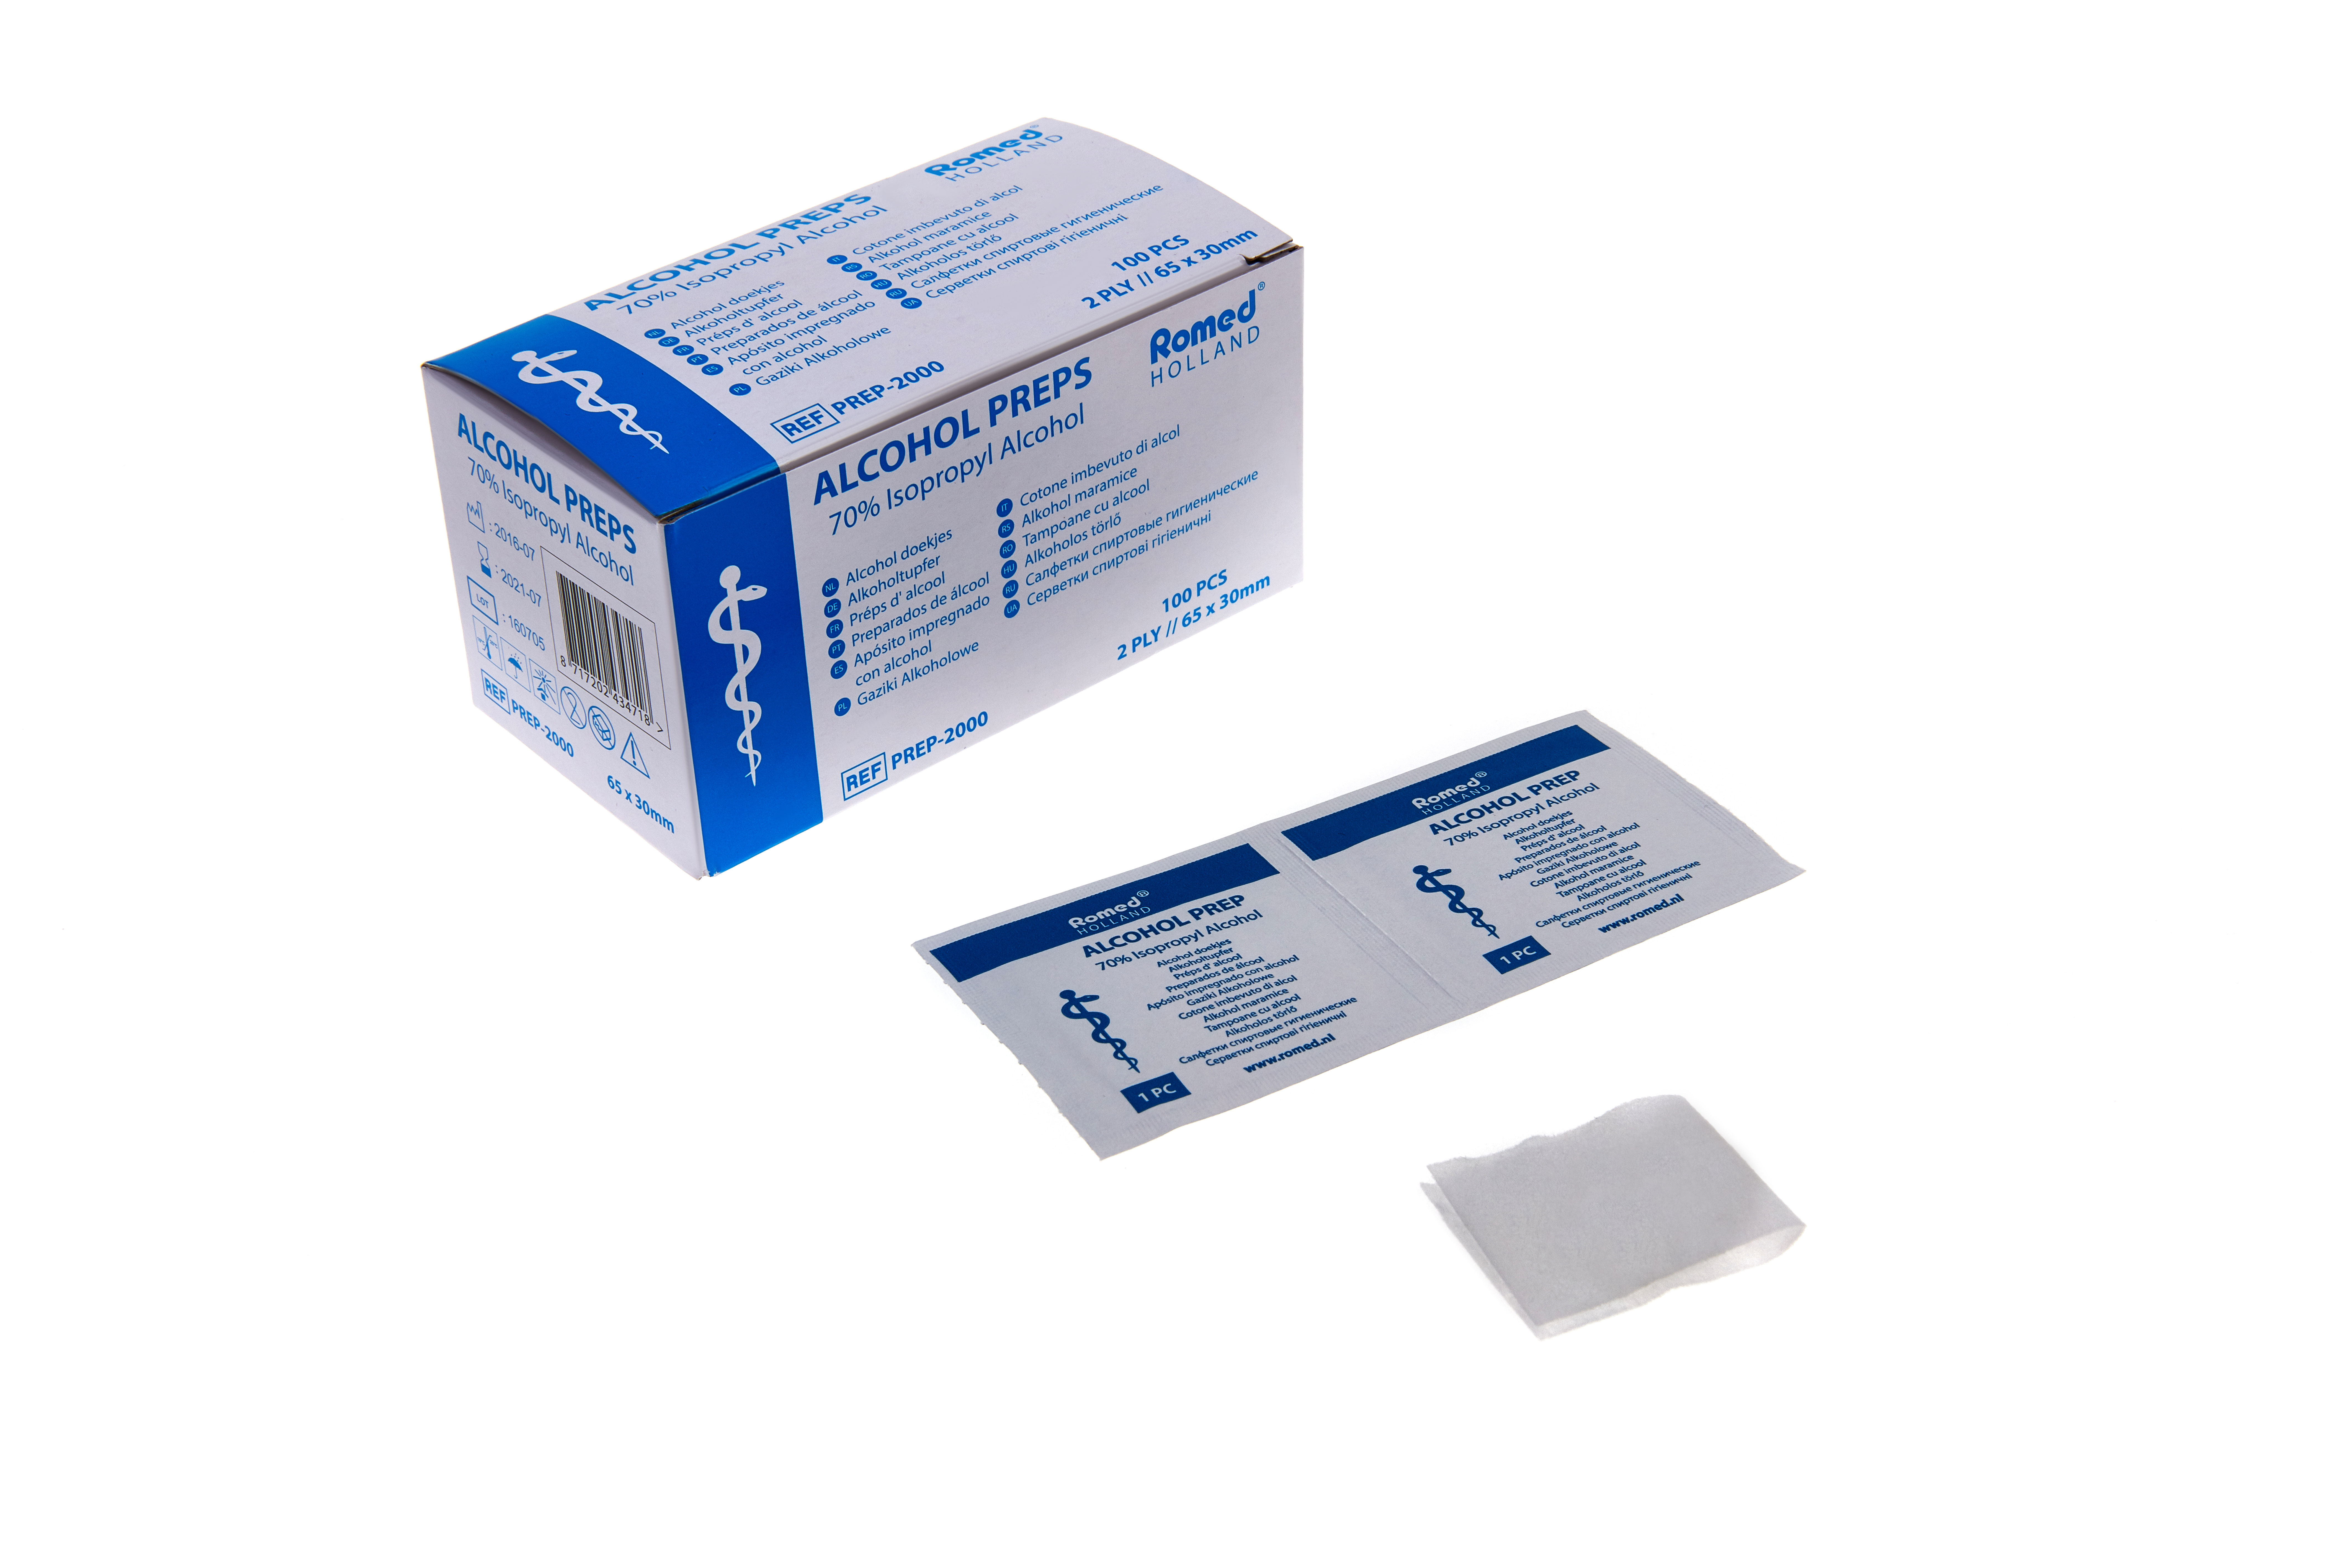 PREP-2000 Romed alcohol preps, 2-ply, 65x30mm, individually packed, per 100 pcs in an inner box, 50 x 100 pcs = 5.000 pcs in a carton.